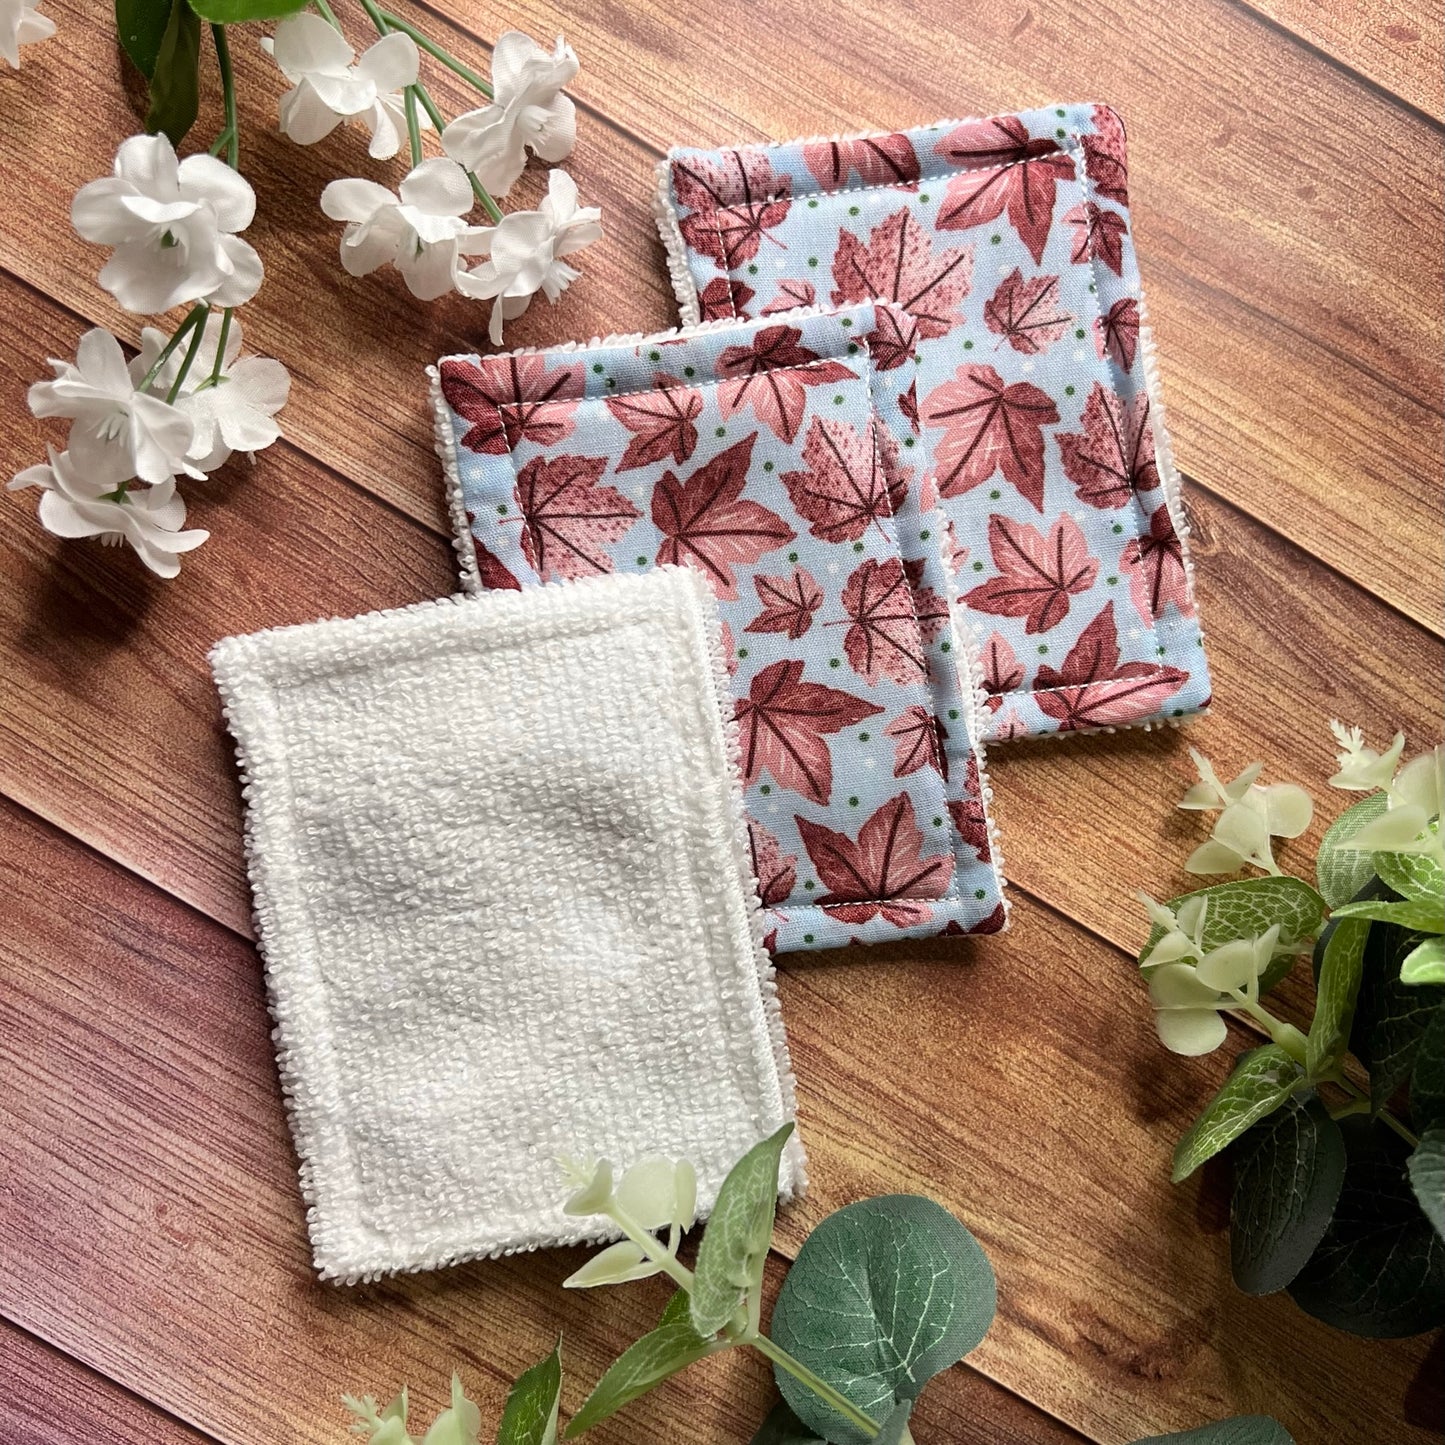 shop our range of skincare gifts, including these exfoliating pads to allow you to exfoliate your face at home. These would be an ideal gift for a nature lover too.